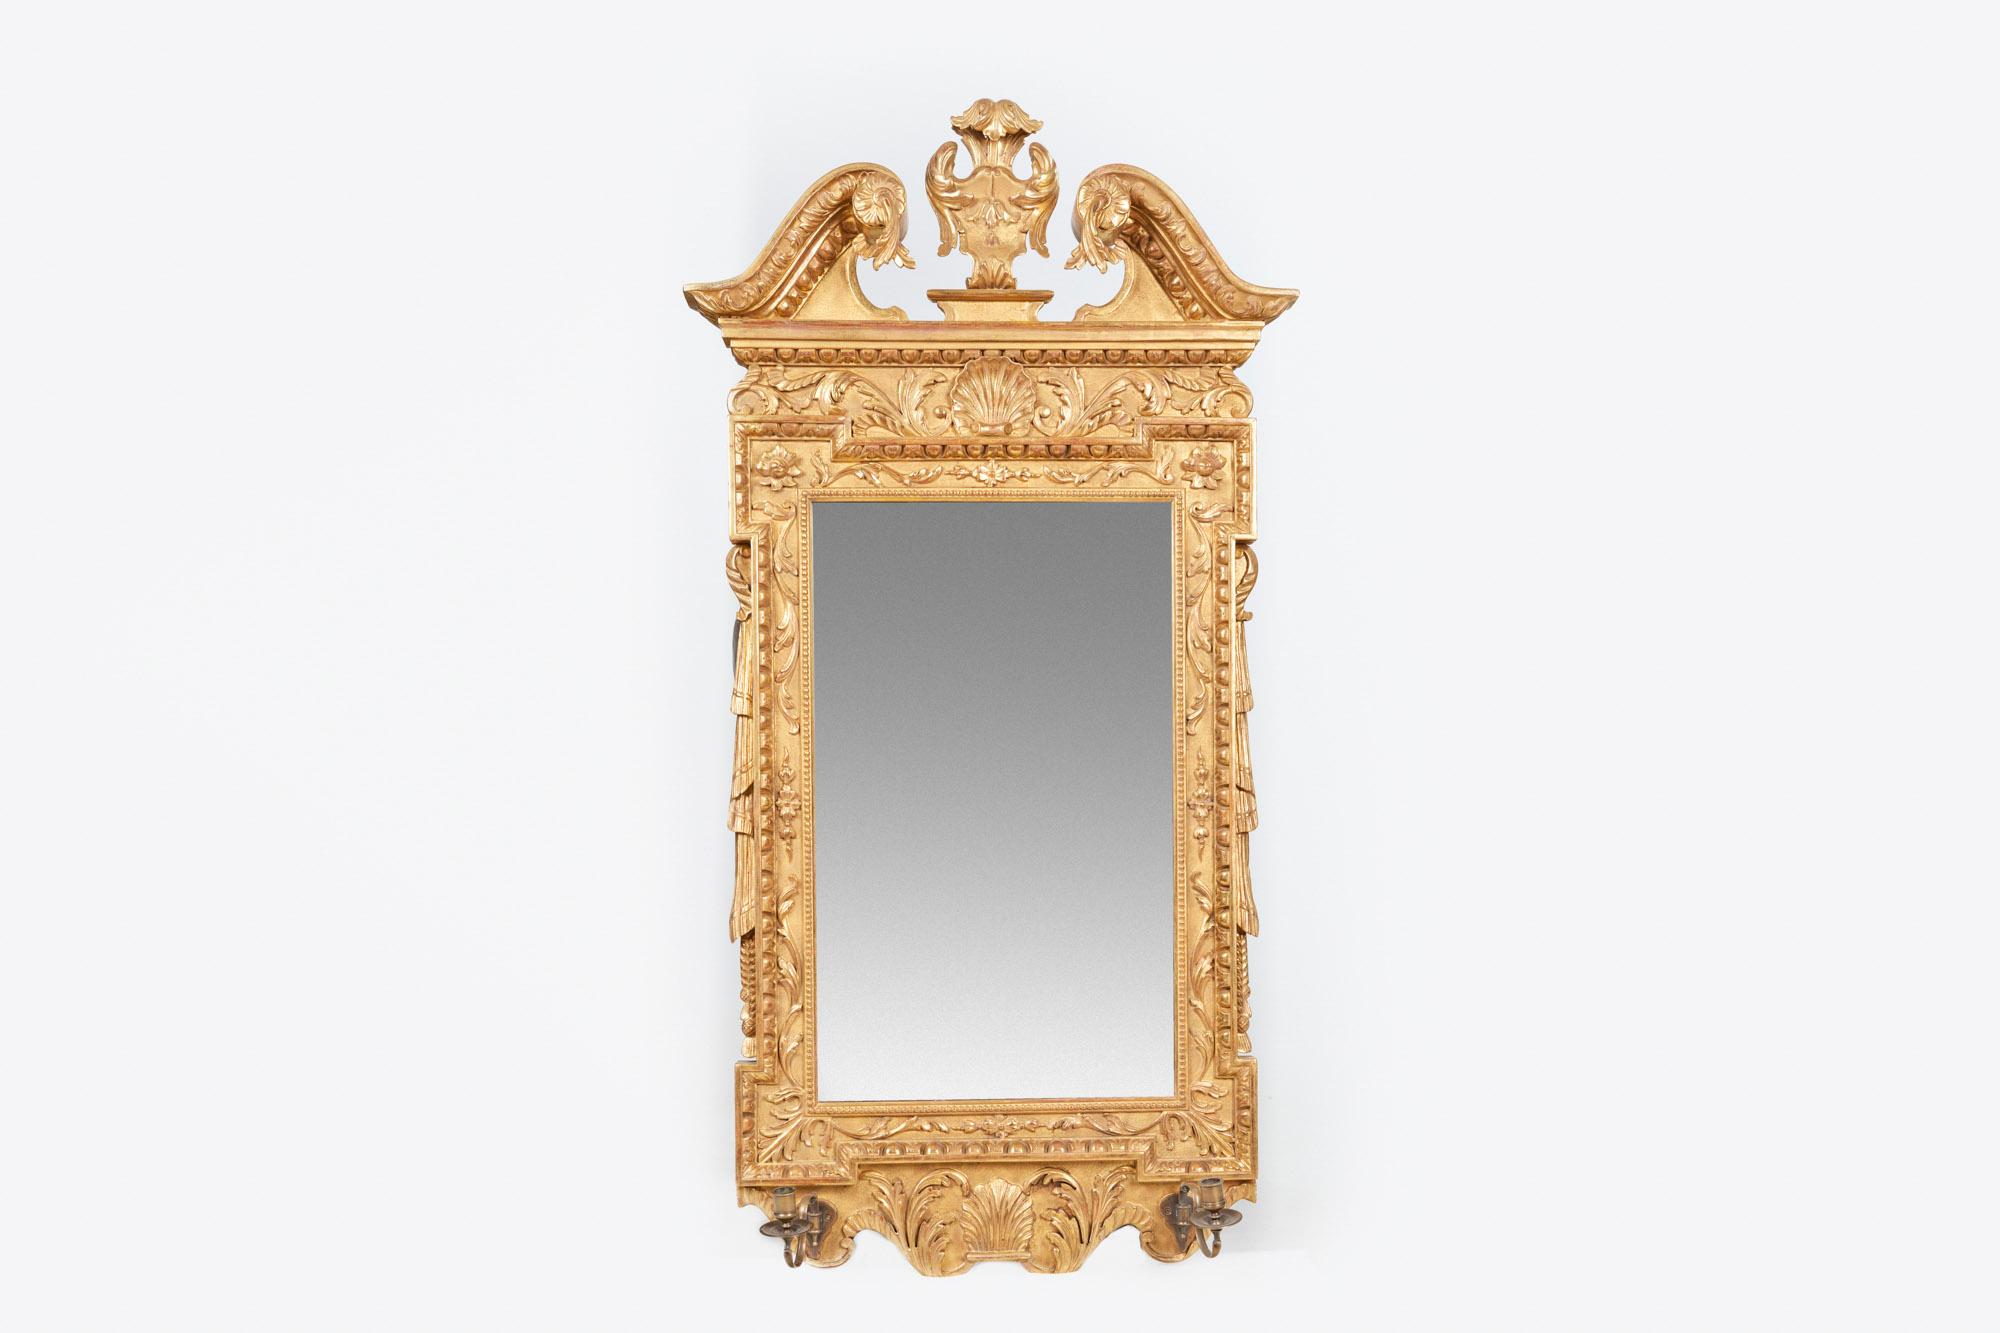 18th century George II Irish water gilded gesso mirror, the period plate glass within carved and moulded frame bordered with beading, foliate and egg and dart relief flanked with stylized tasselled drapery, the cresting centred with plumed cartouche